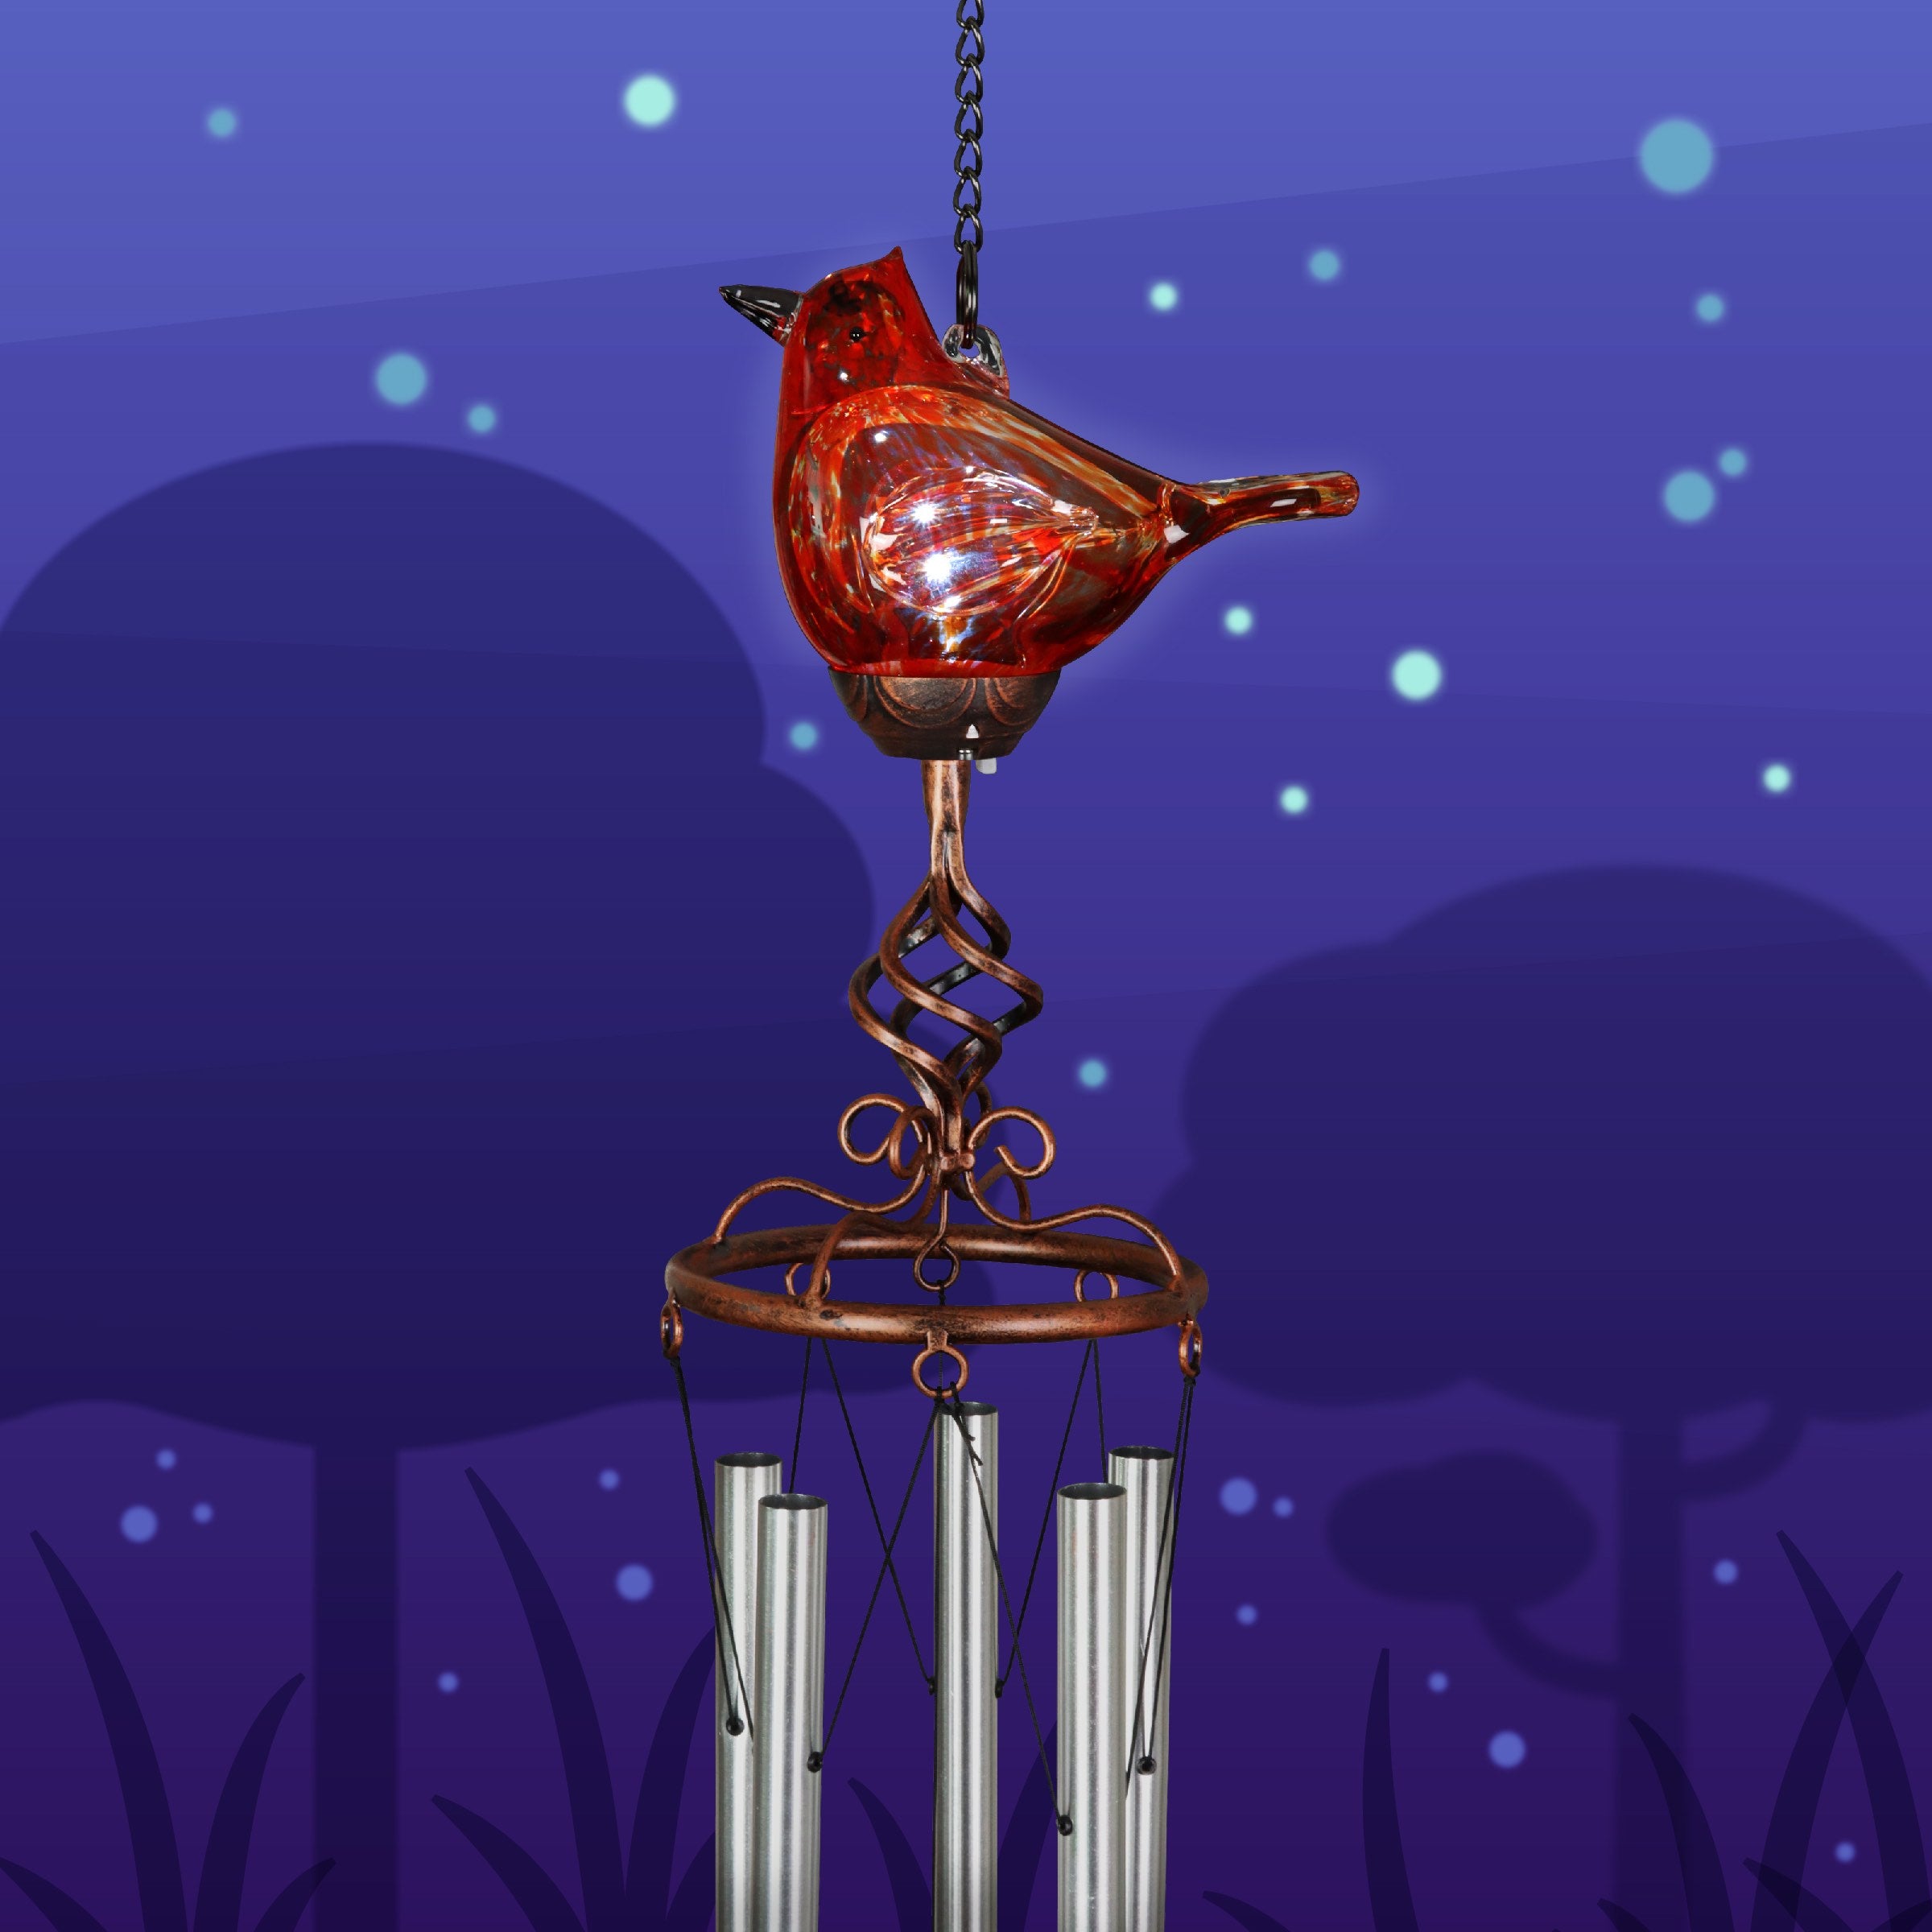 Cardinal-Windchimes-for-Mothers-Day.jpg__PID:ed5d8d0b-15f8-423c-8bc6-9638e4ab549a